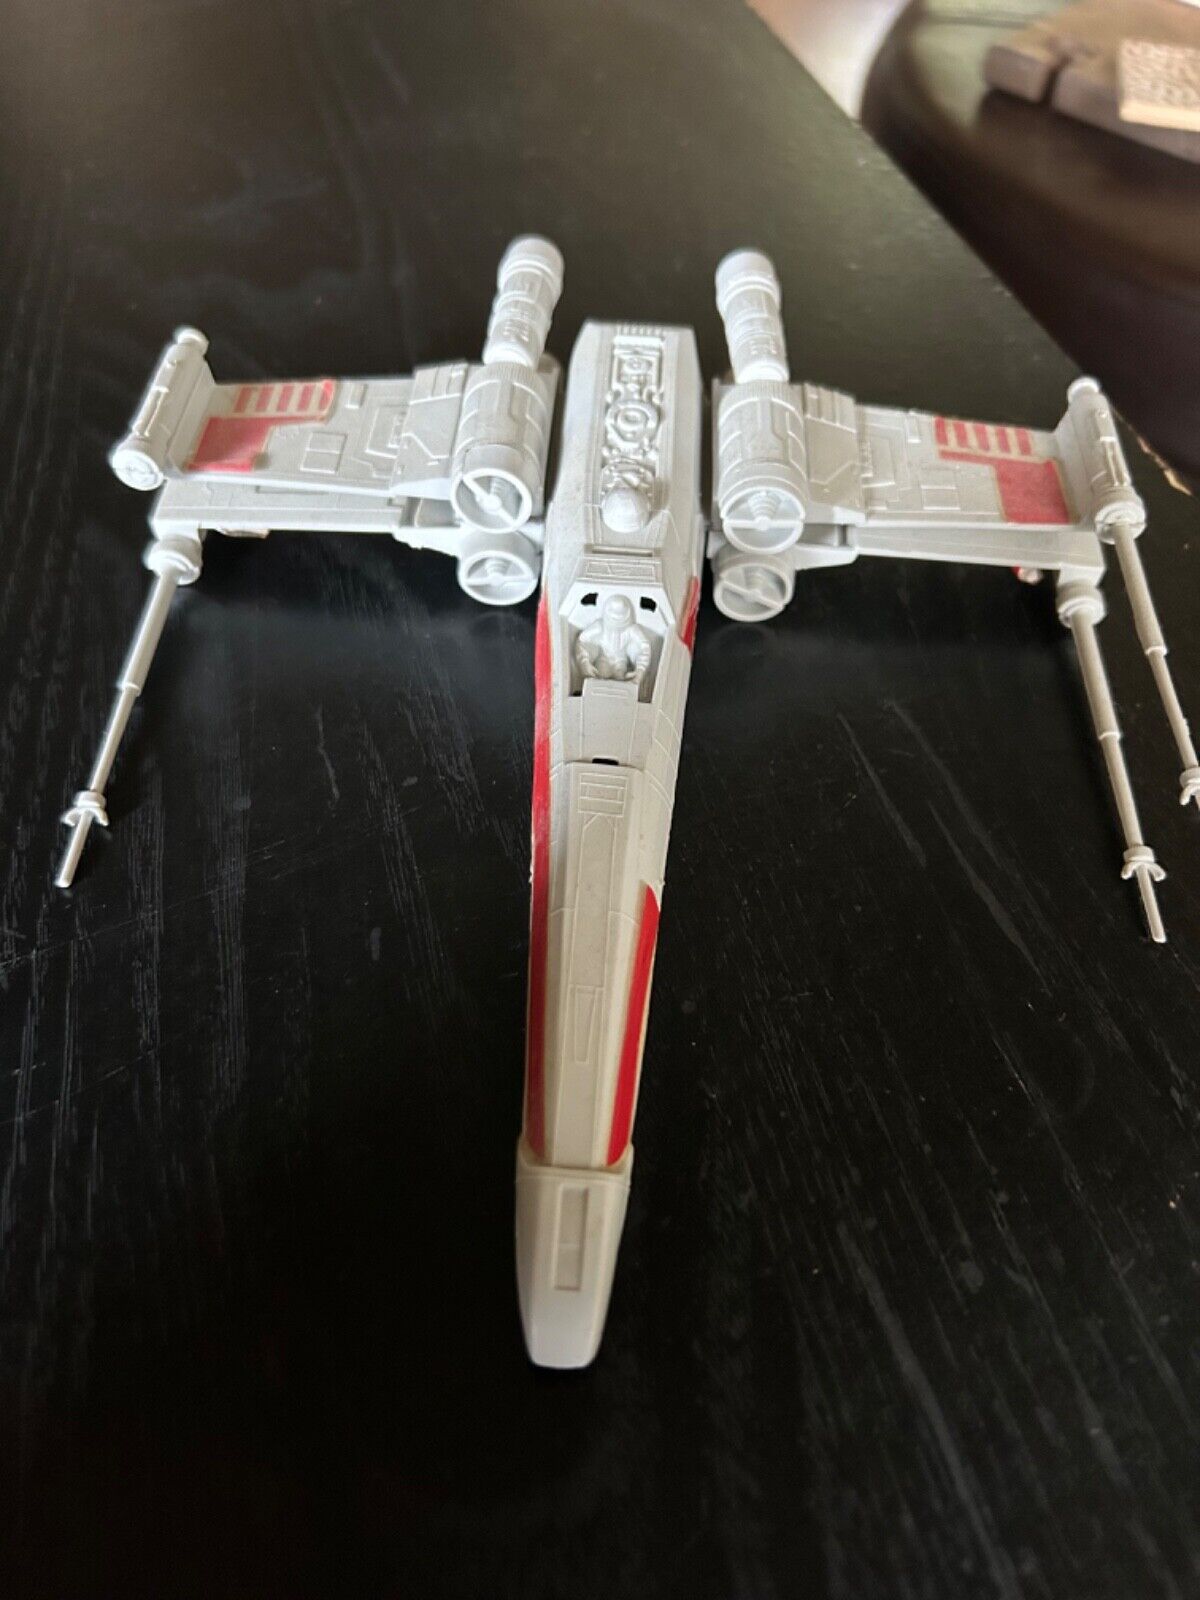 Star Wars model of X-wing fighter